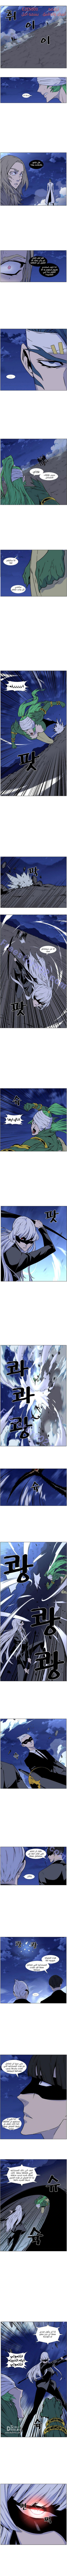 Noblesse: Chapter 455 - Page 1